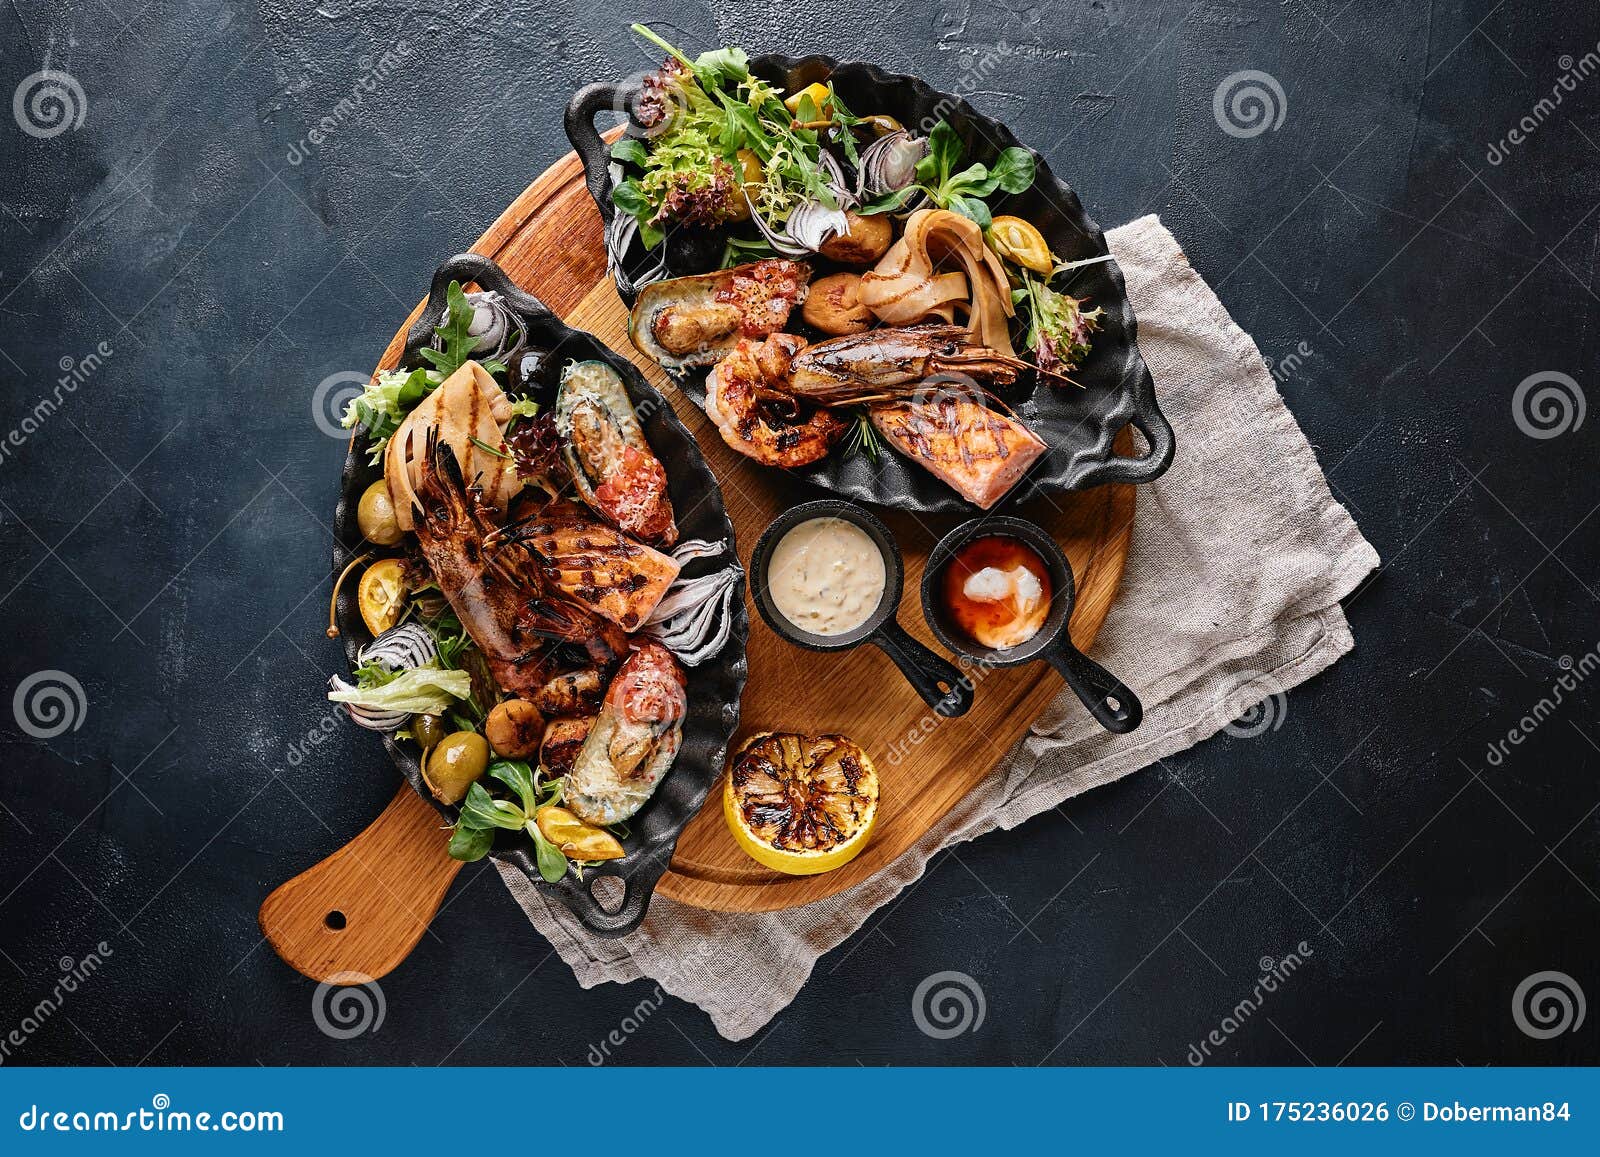 Grilled Seafood Platter. Assorted Delicious Grilled Seafood with Vegetables  Stock Photo - Image of dish, closeup: 175236026